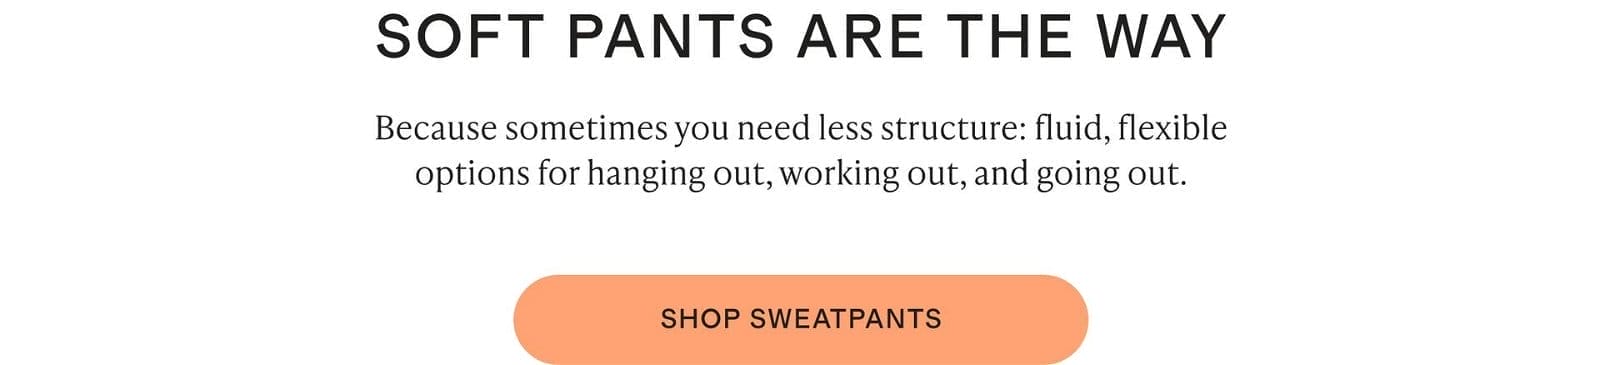 SOFT PANTS ARE THE WAY